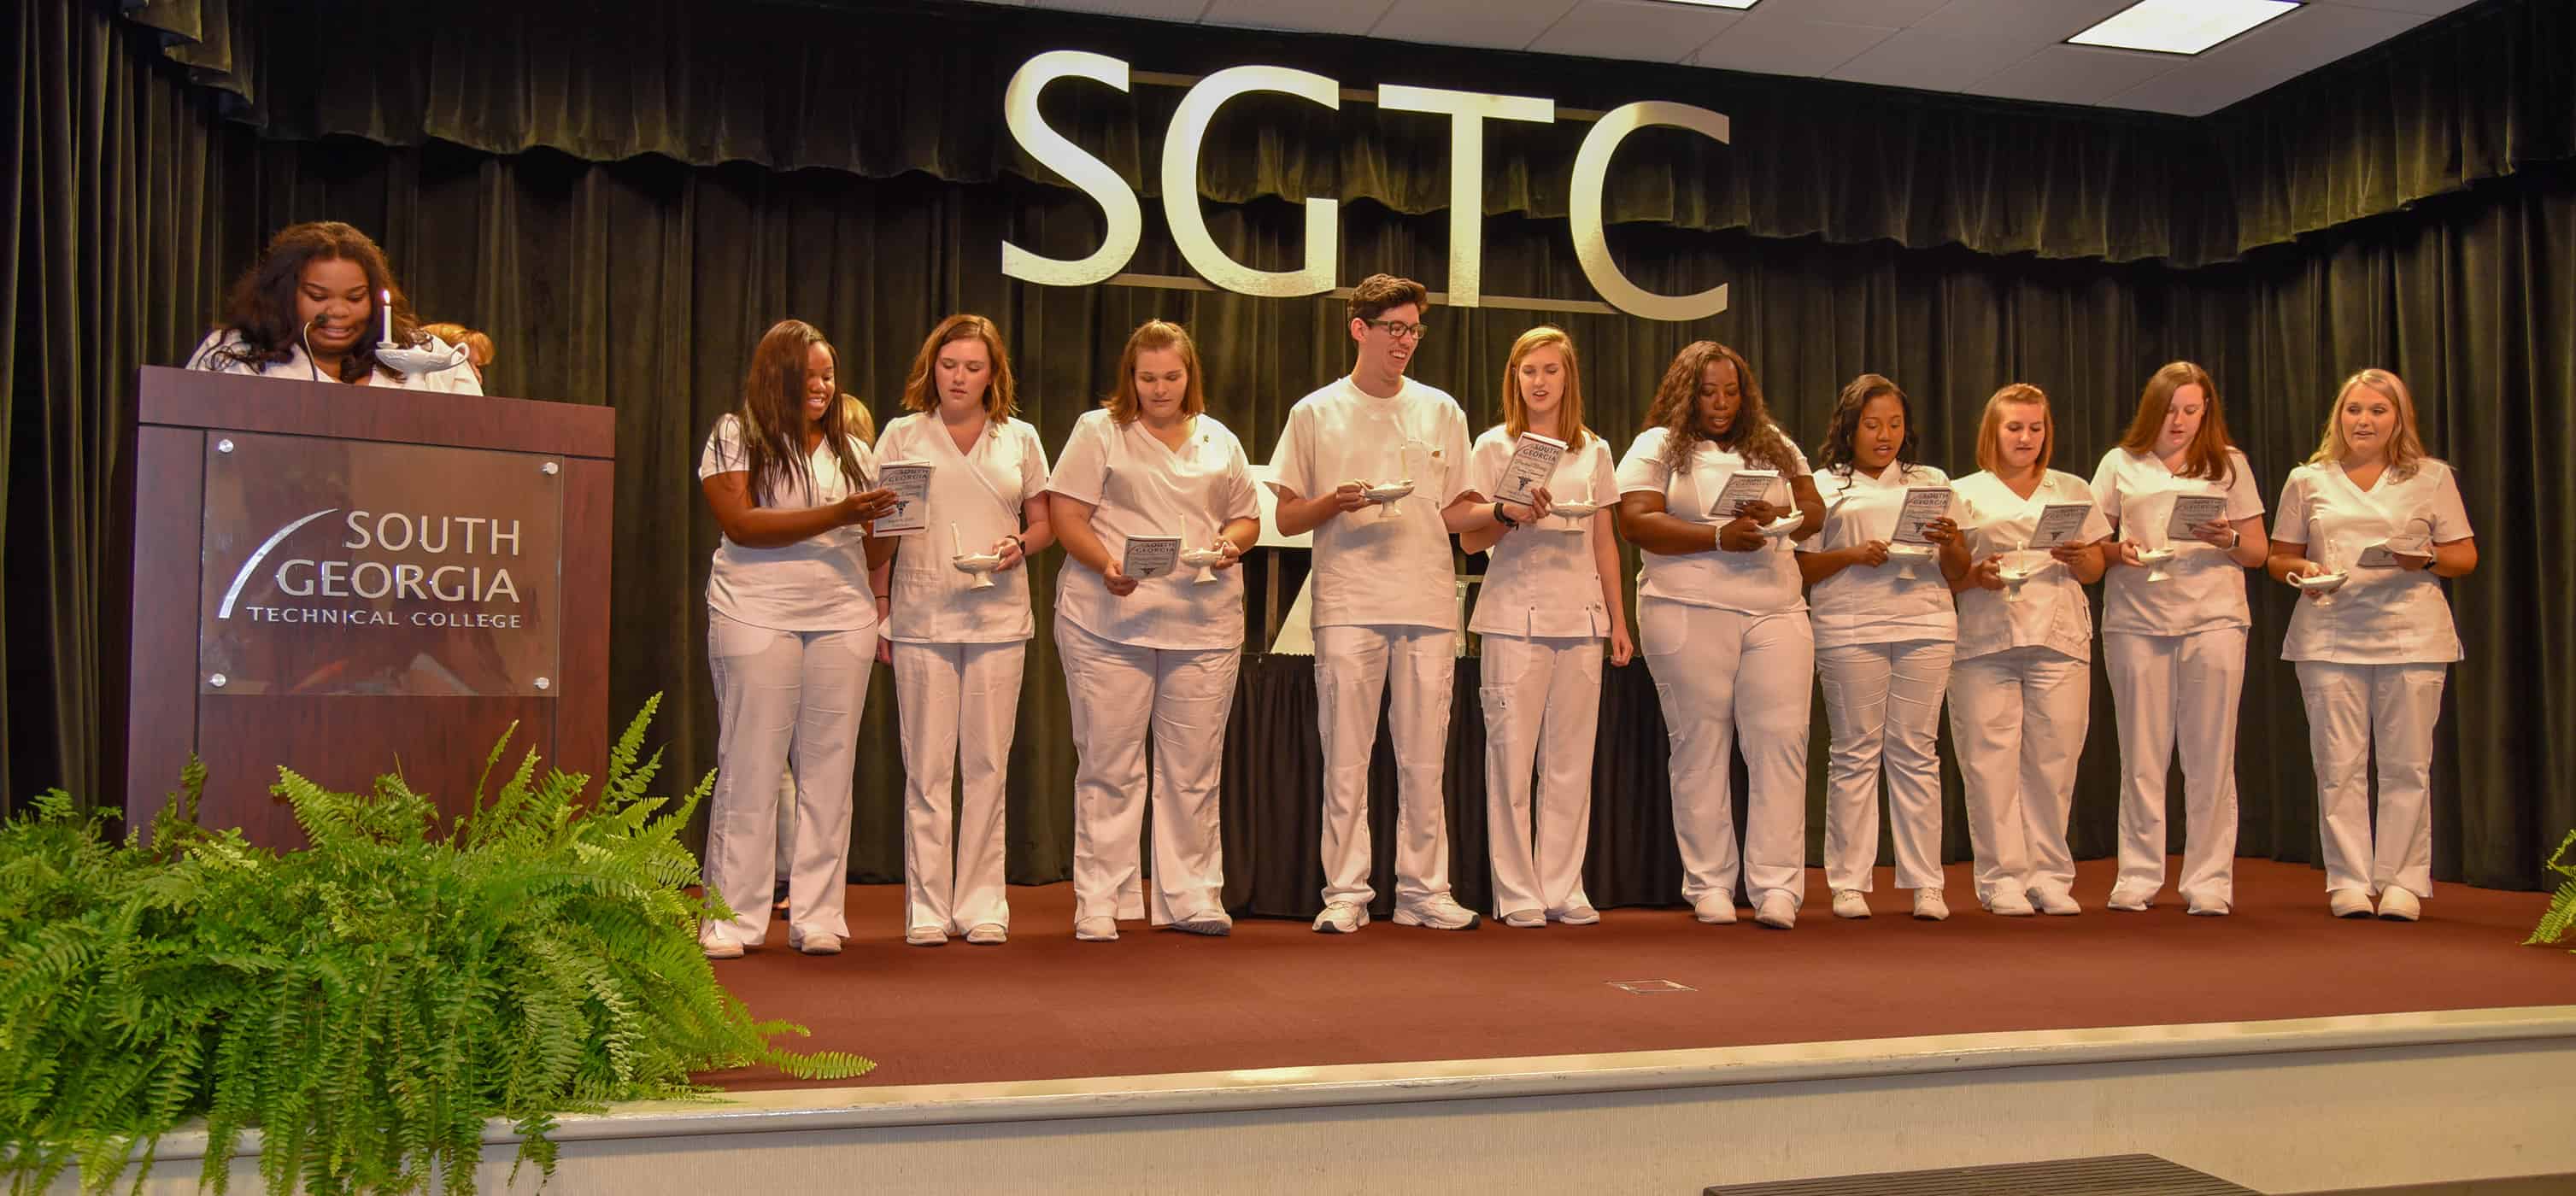 11 people stand on a stage wearing white scrubs, holding candles.